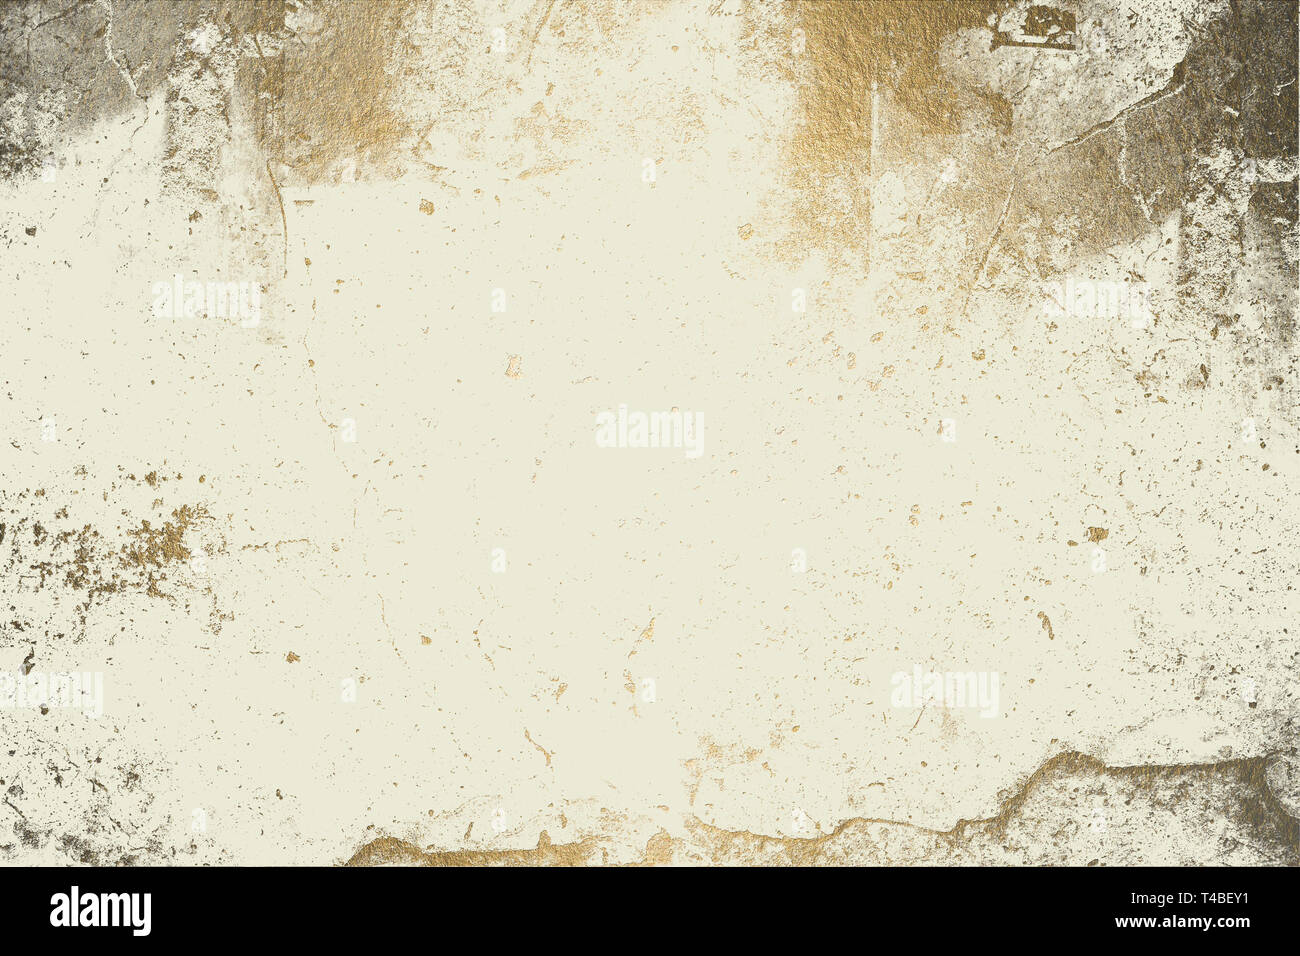 Luxury texture with splash gold. Light color background. Gold ...